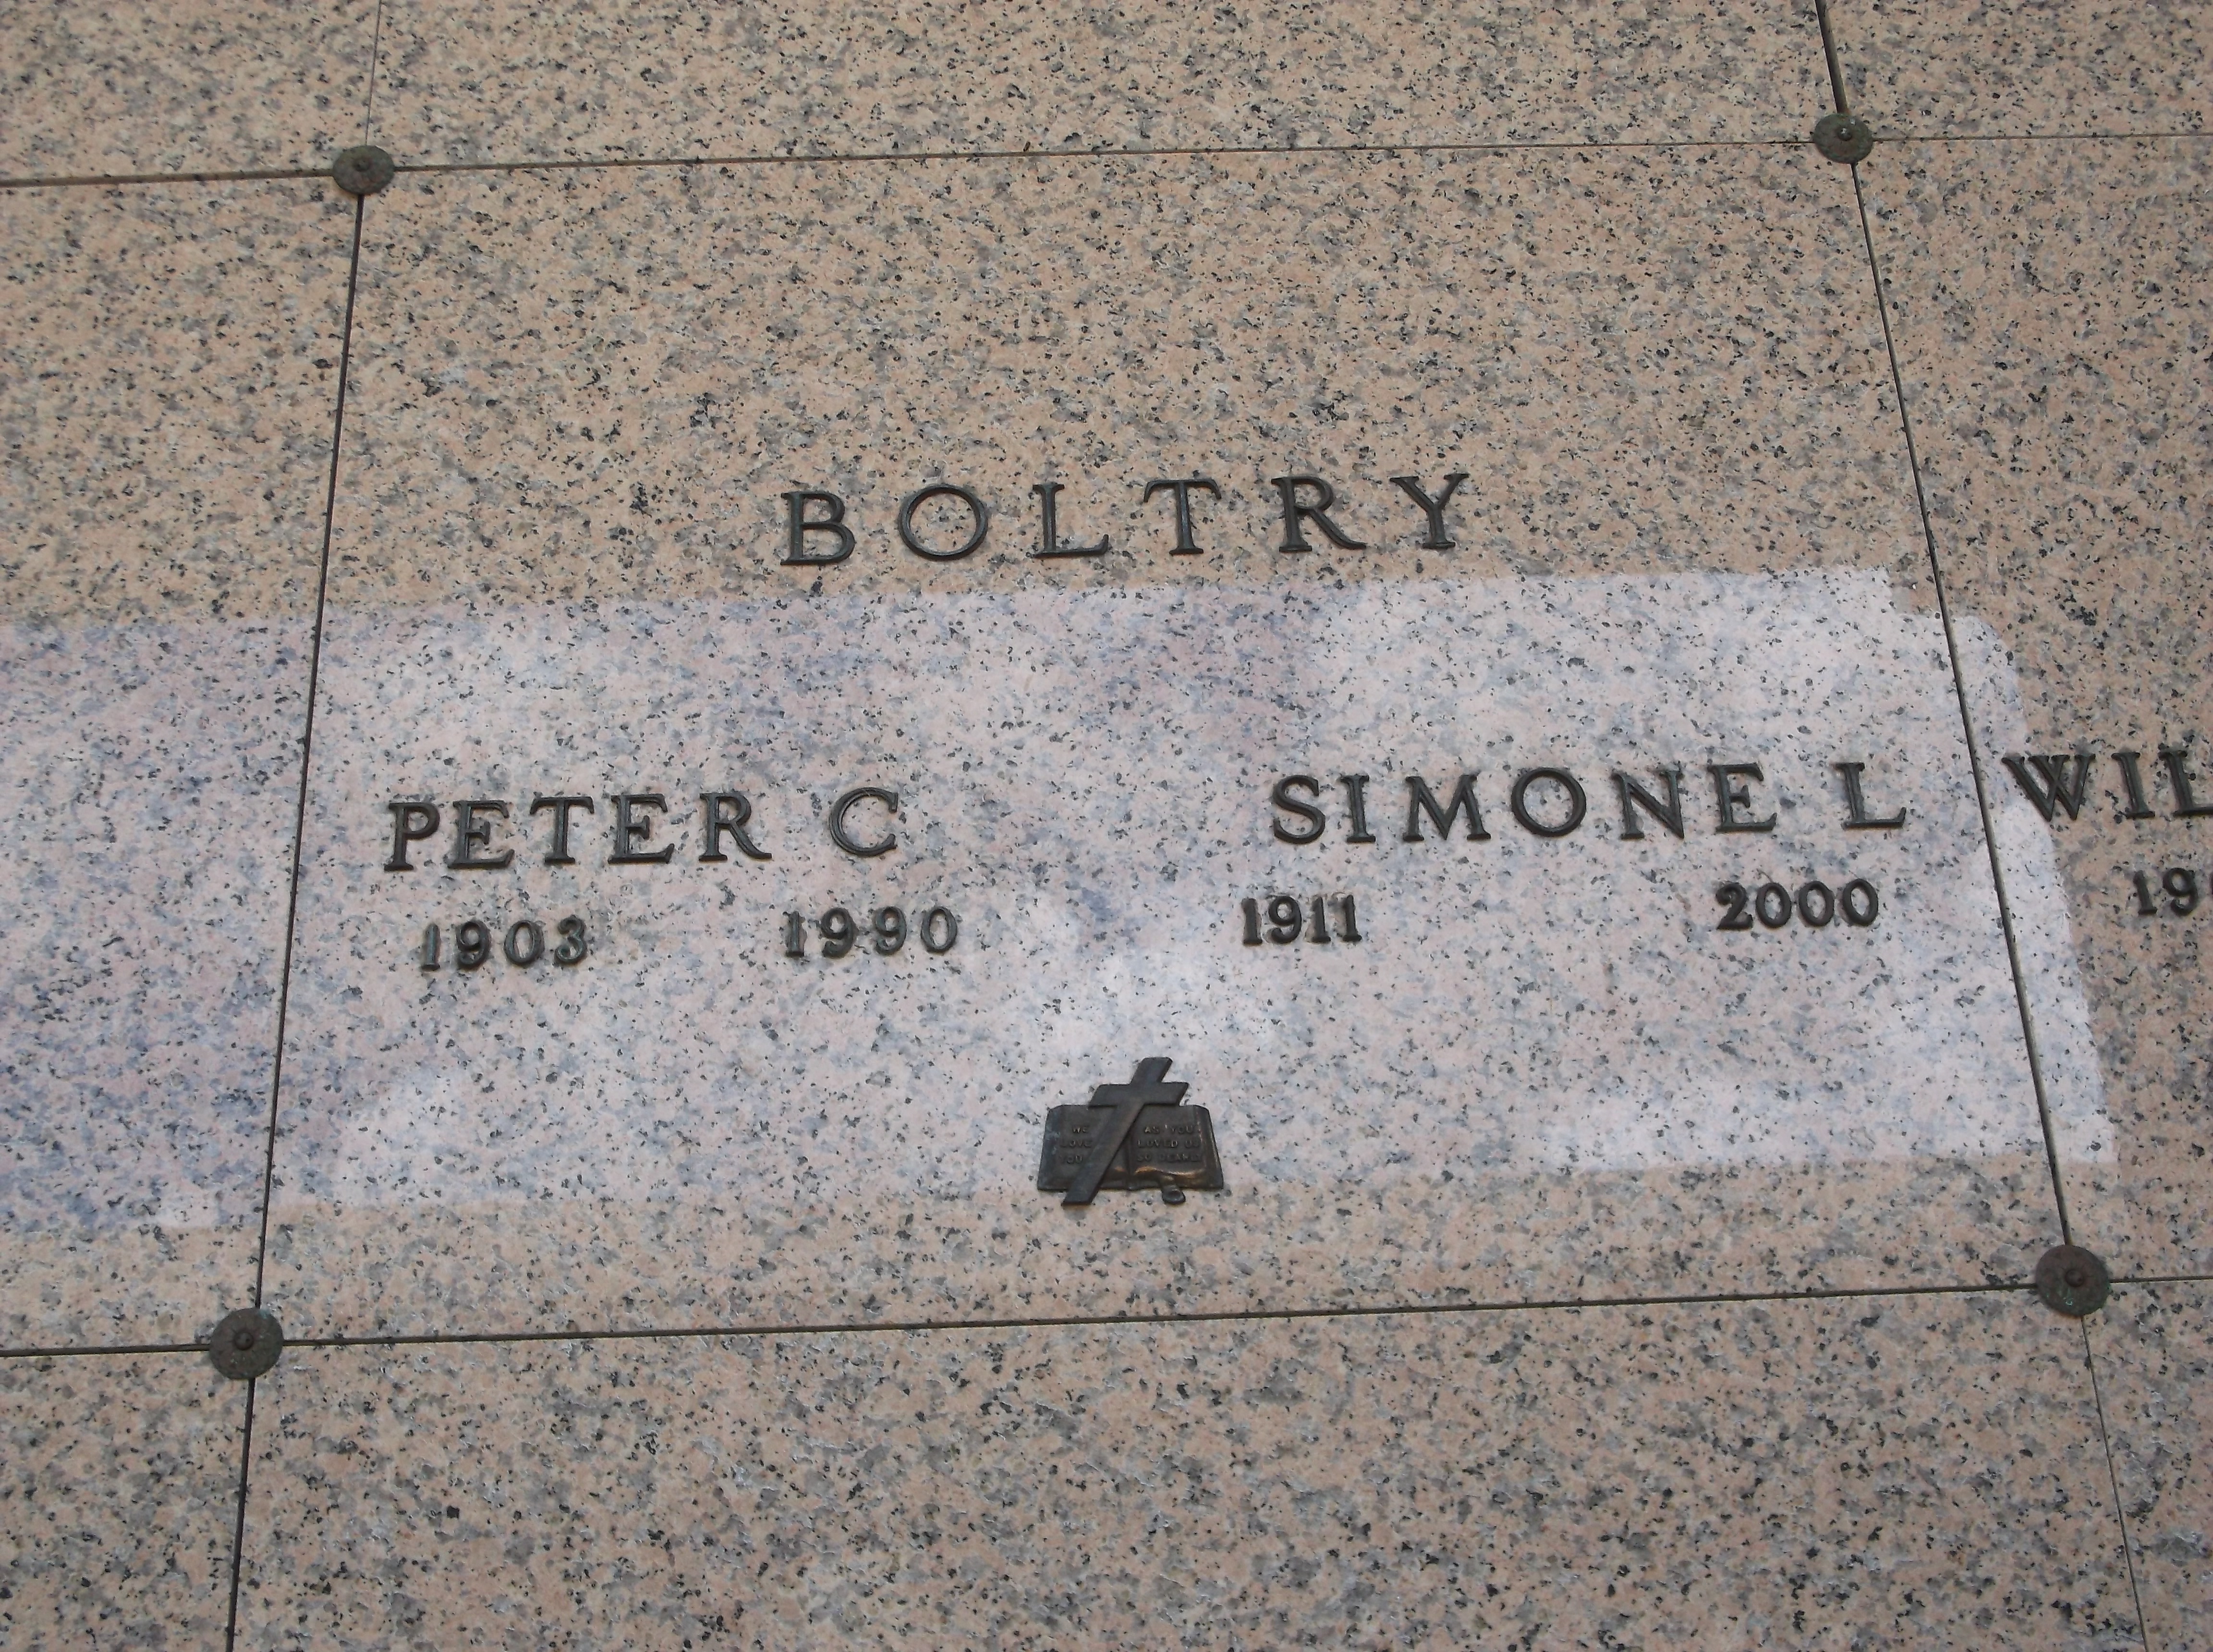 Peter C Boltry